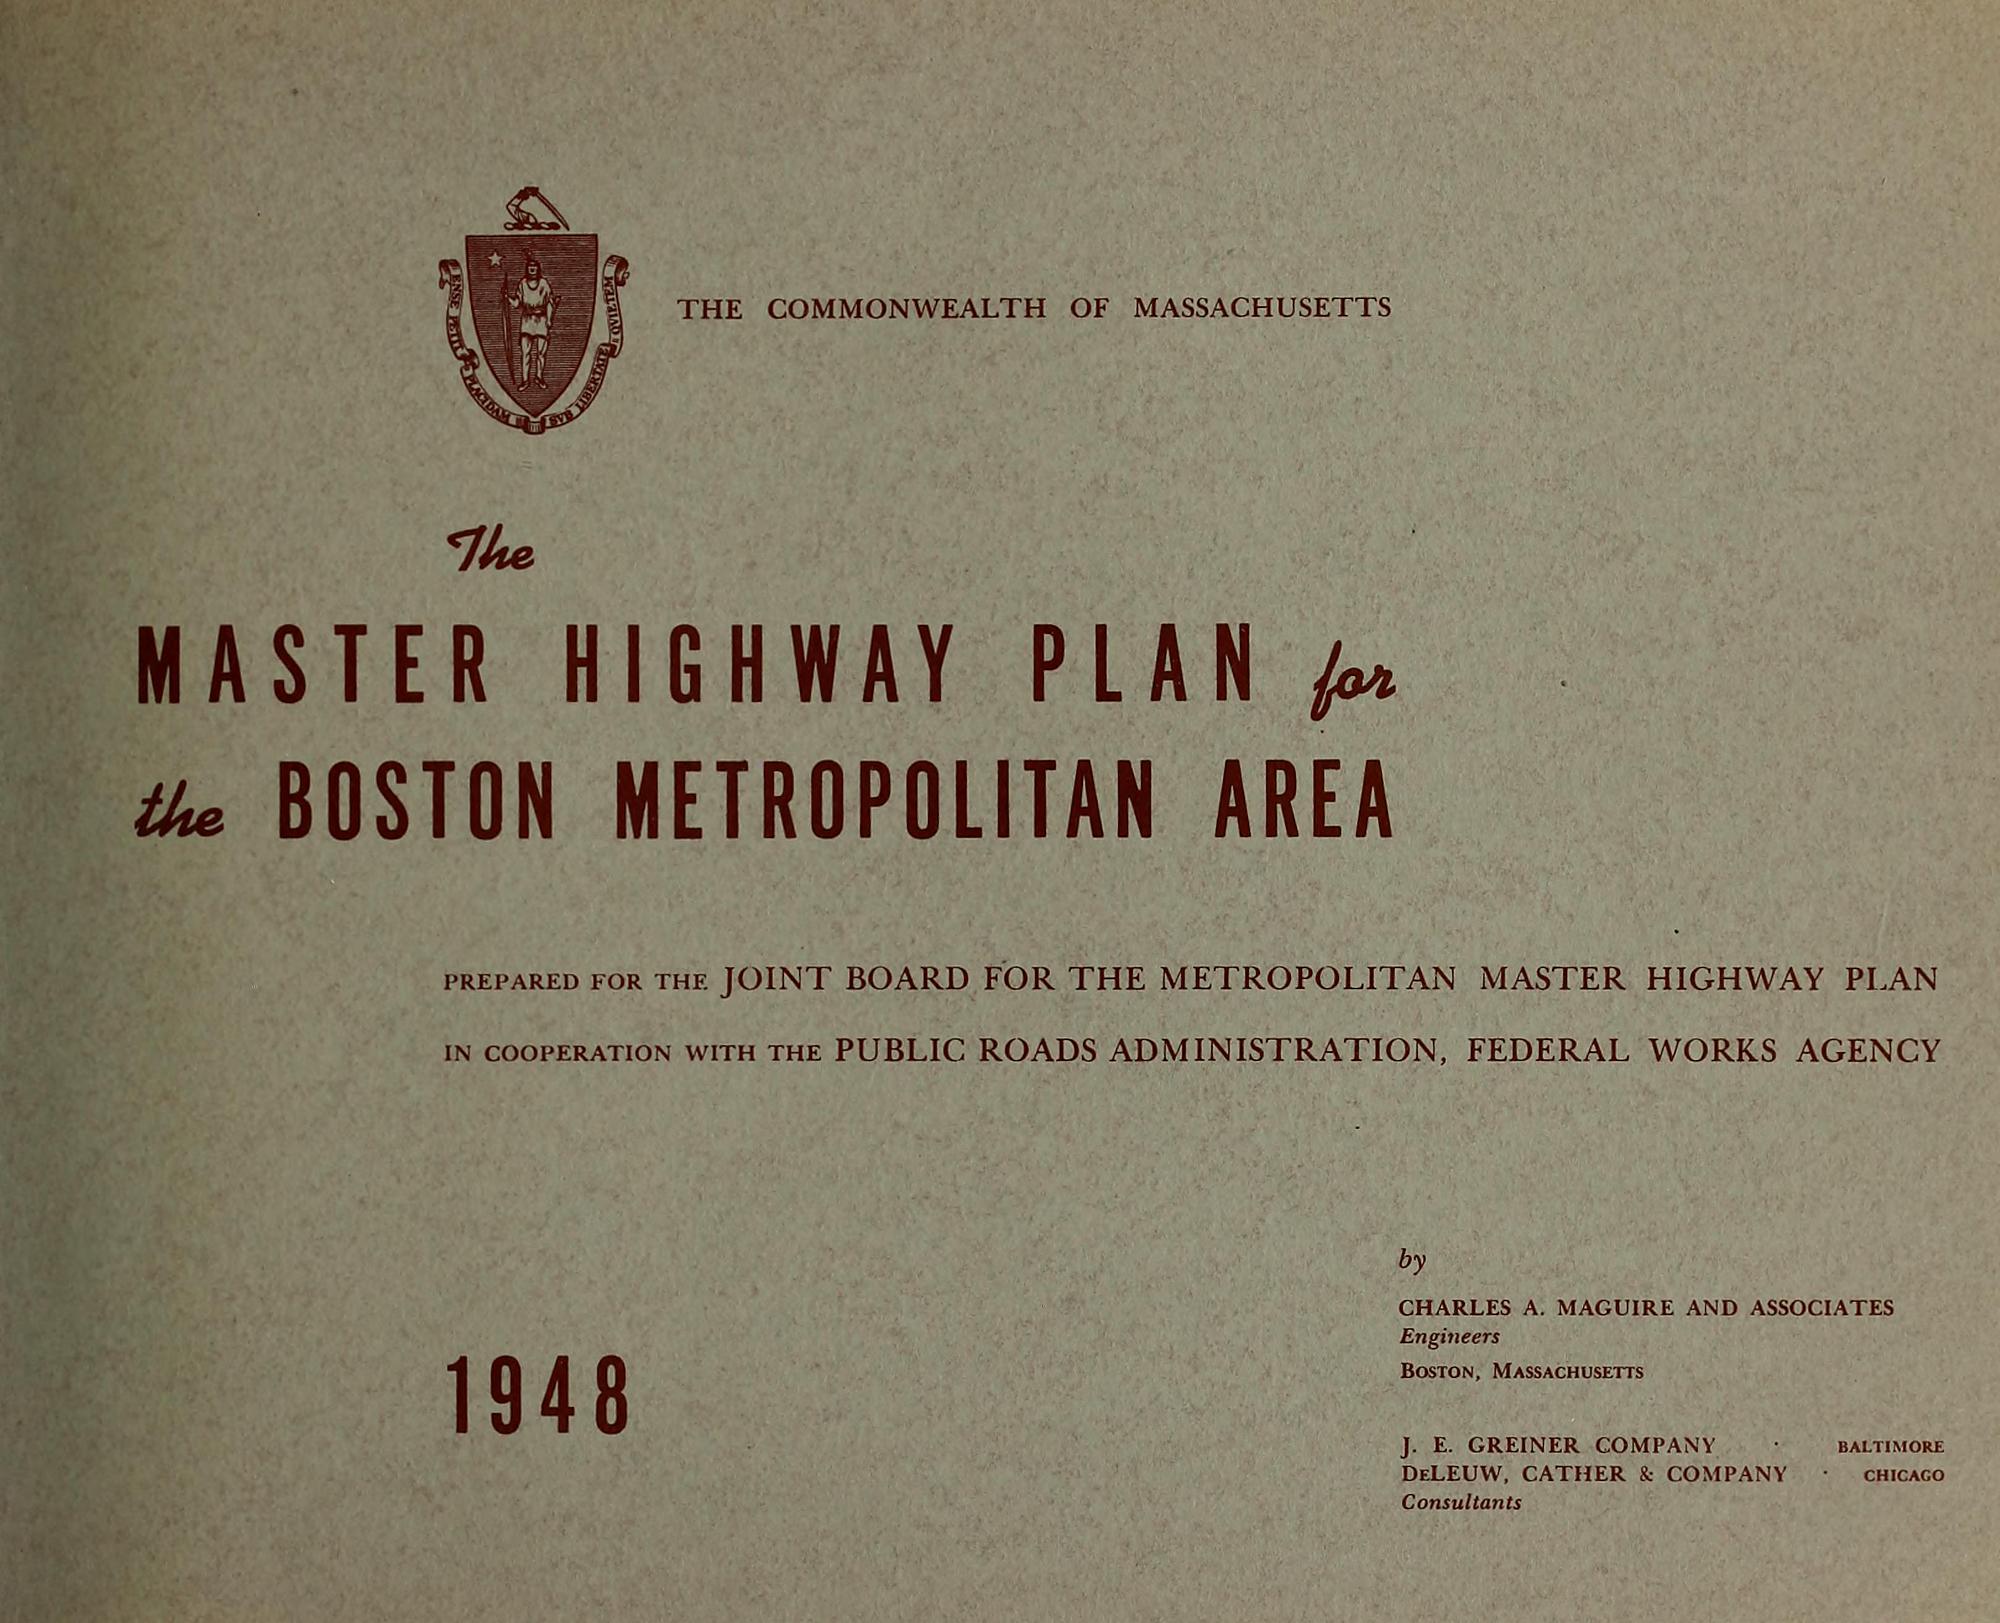 The Plan was compiled by Charles A. Maguire and Associates of Boston, J. E. Greiner Company of Baltimore, and De Leuw, Cather &amp; Company of Chicago.